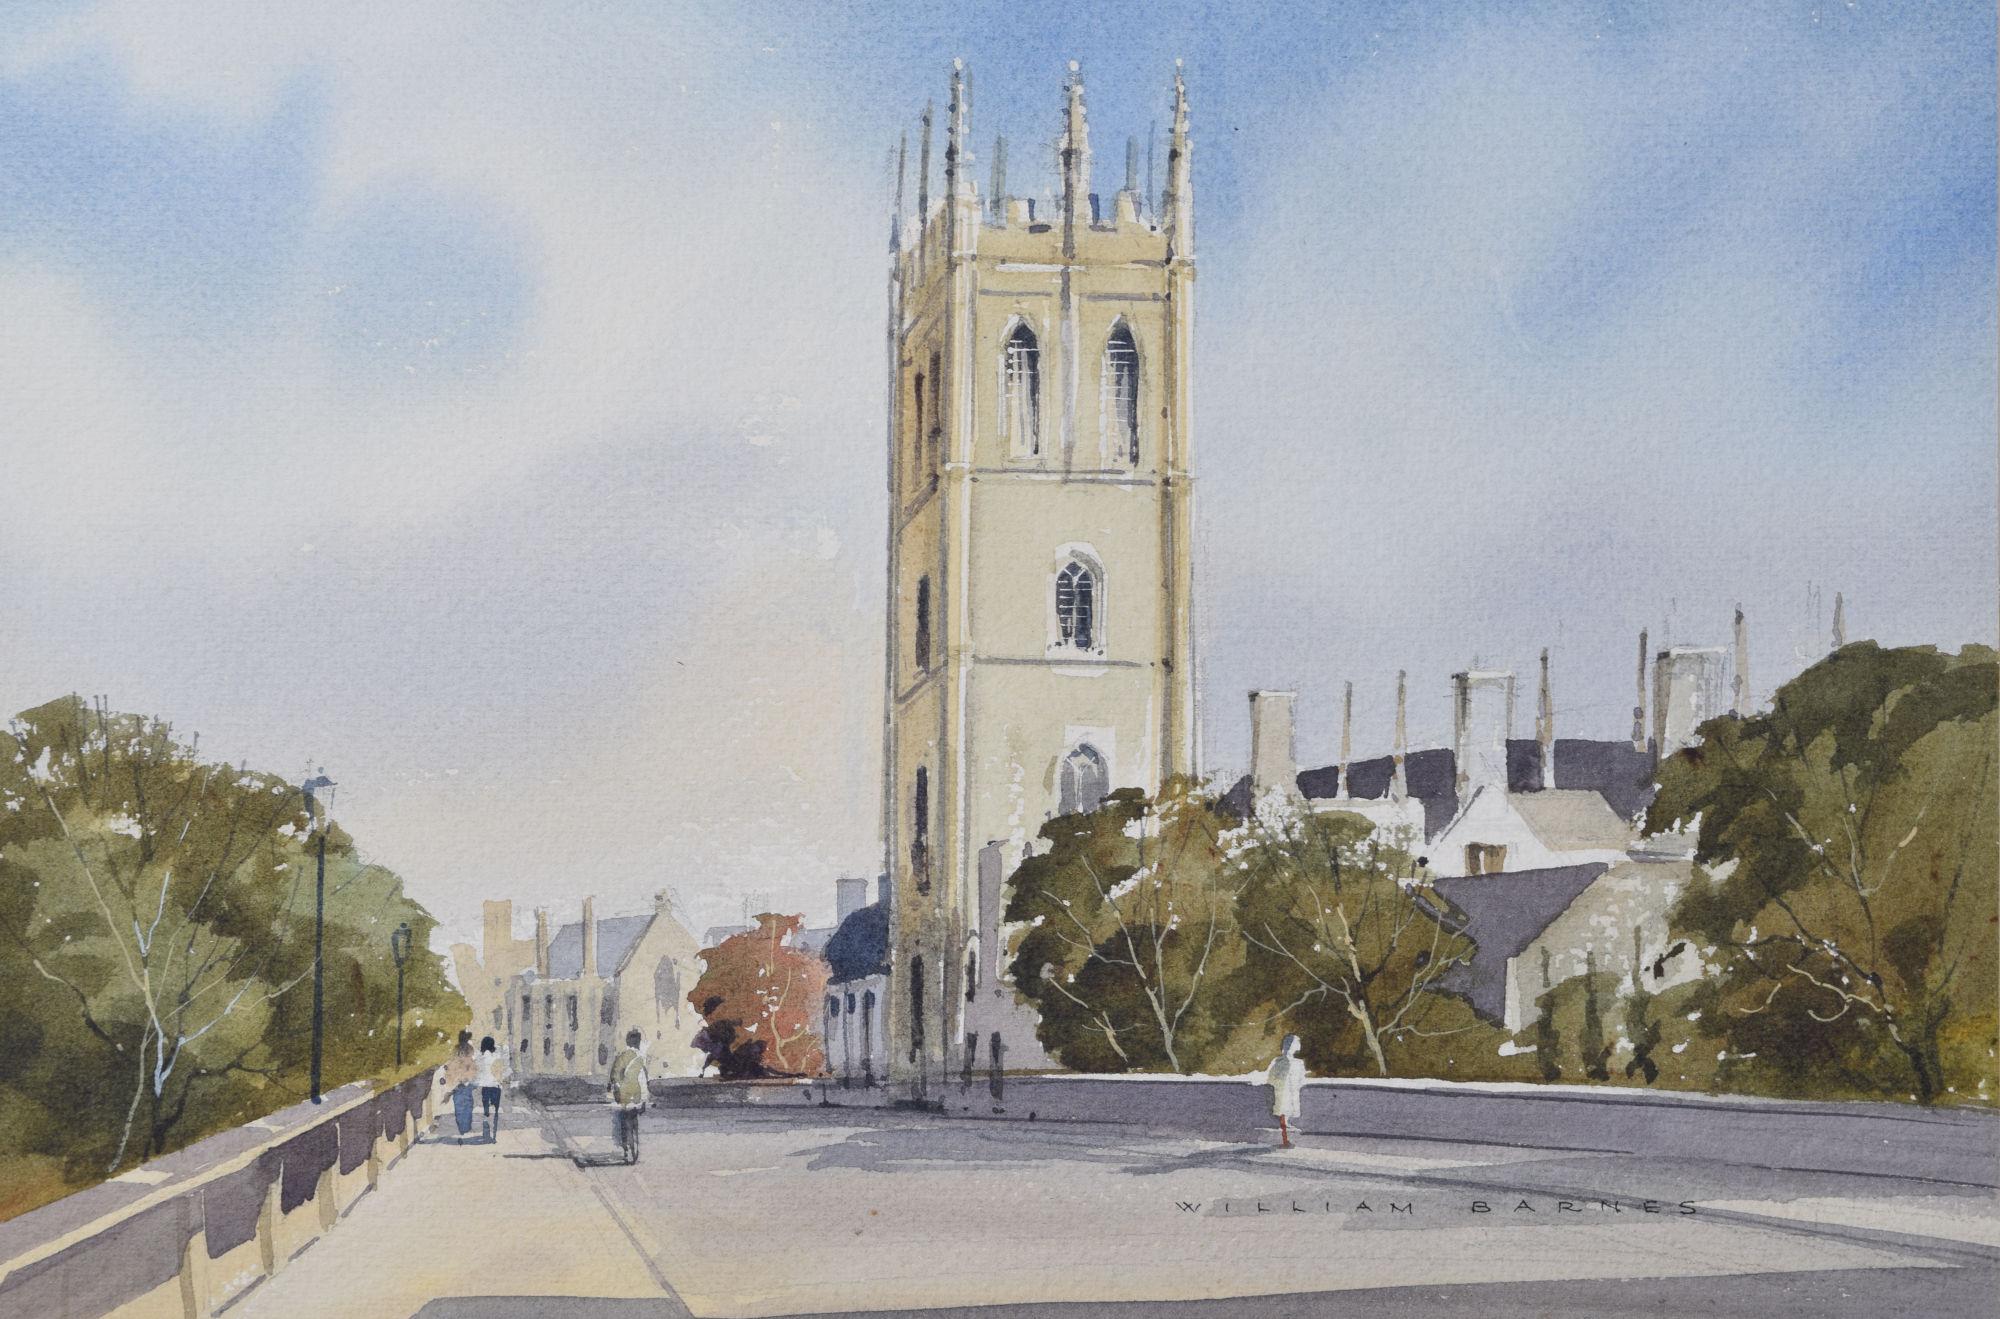 To see our other views of Oxford and Cambridge, scroll down to "More from this Seller" and below it click on "See all from this Seller" - or send us a message if you cannot find the view you want.

William Barnes (1916 - ?)
Magdalen Tower and